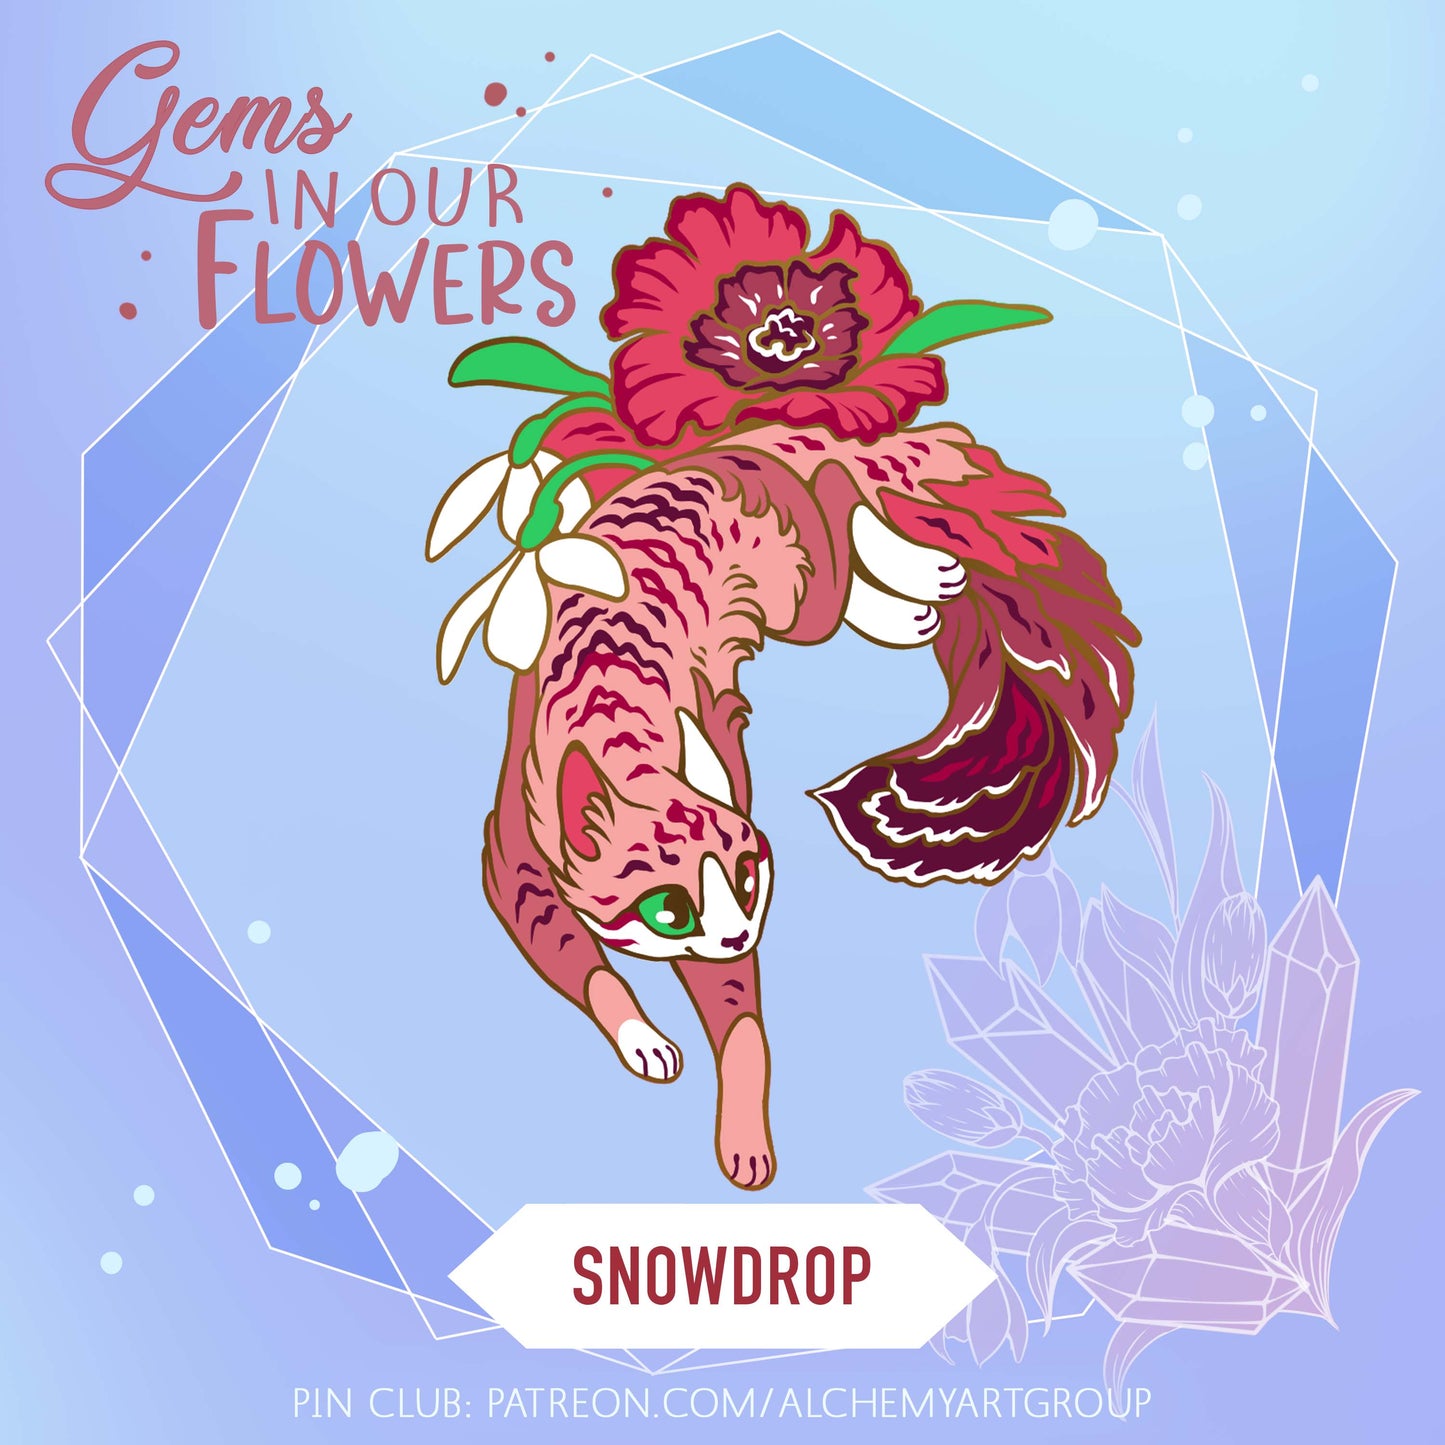 [Gems in our Flowers] Snowdrop - January Flower